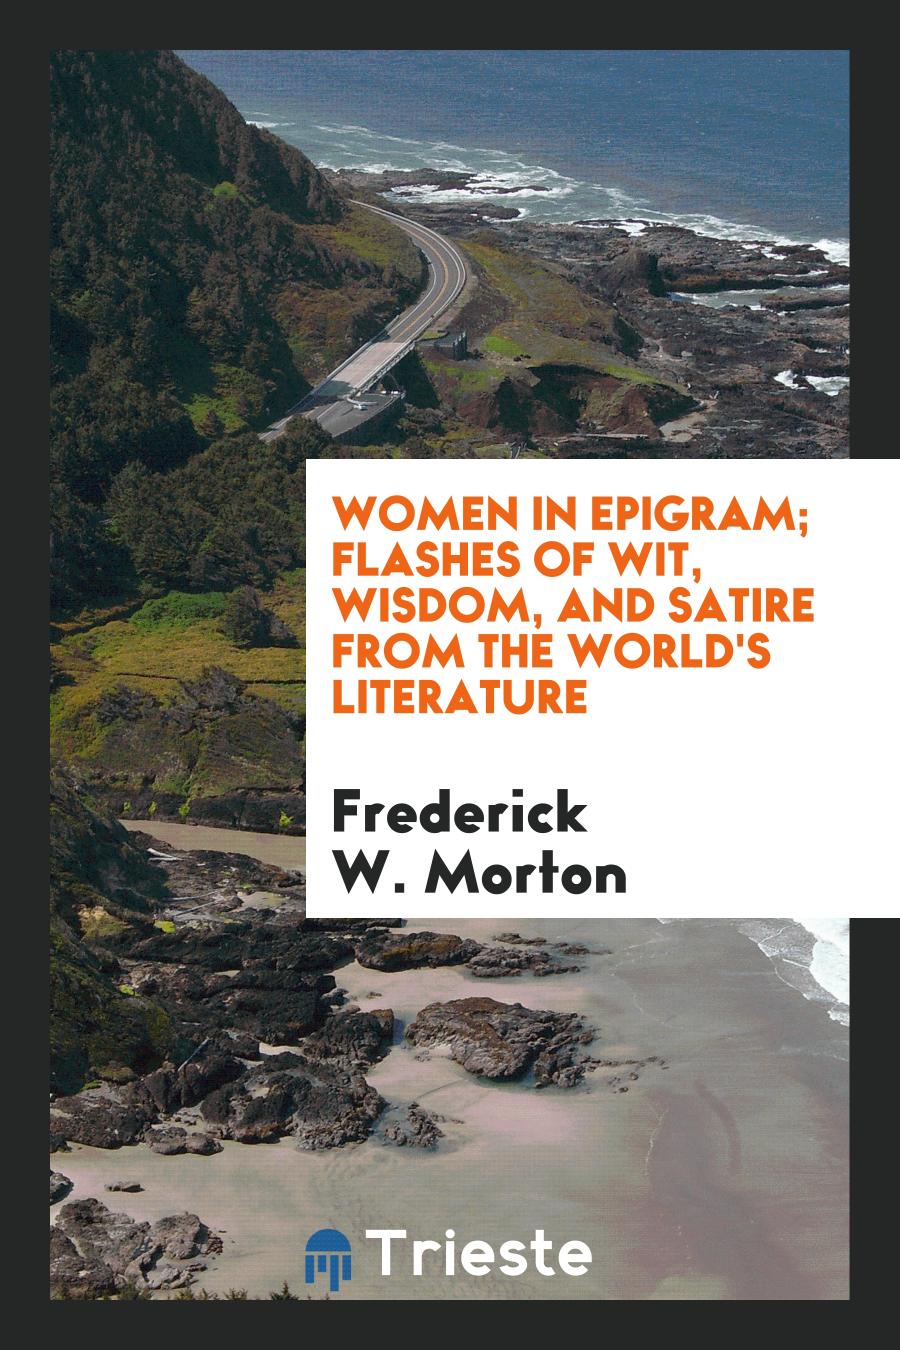 Women in epigram; flashes of wit, wisdom, and satire from the world's literature